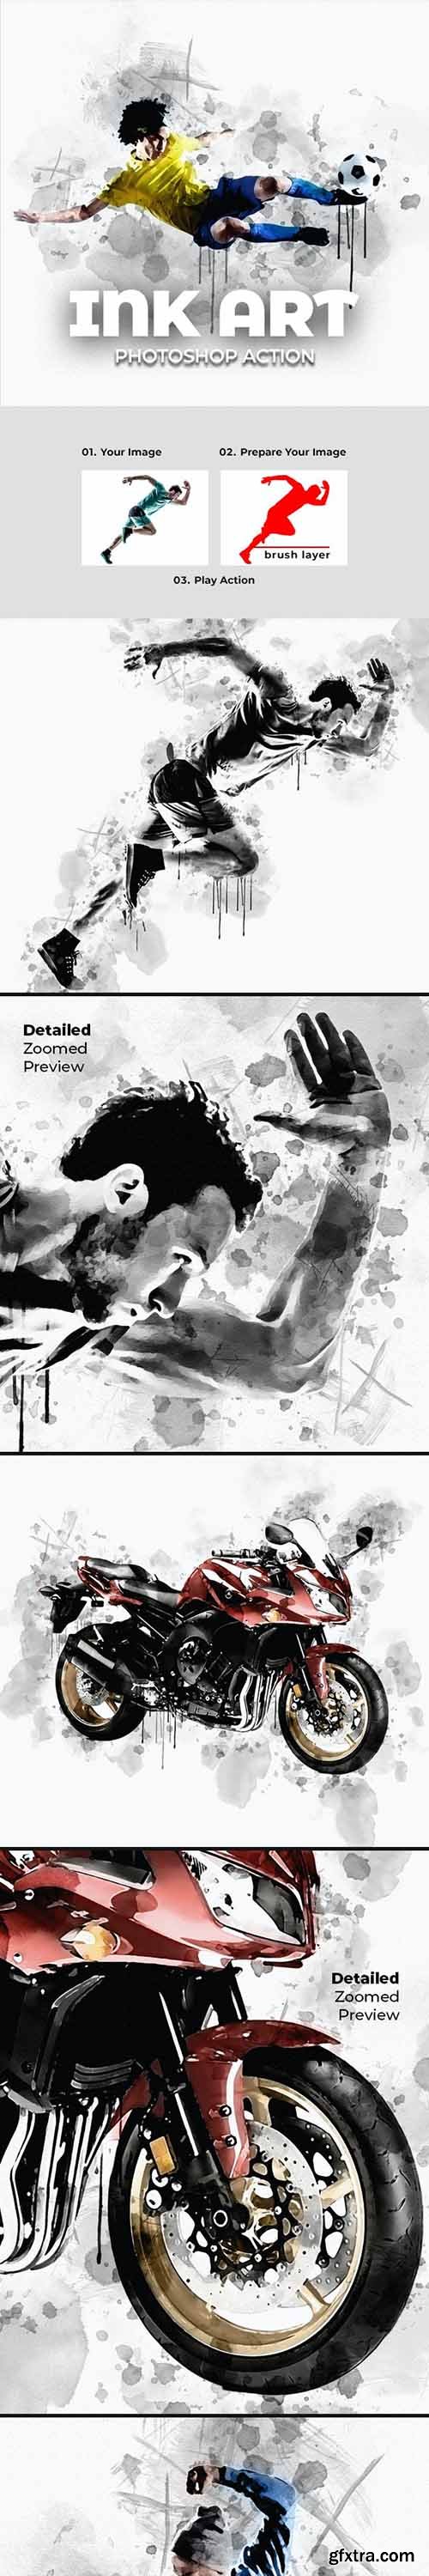 GraphicRiver - Ink Art Photoshop Action 28285461